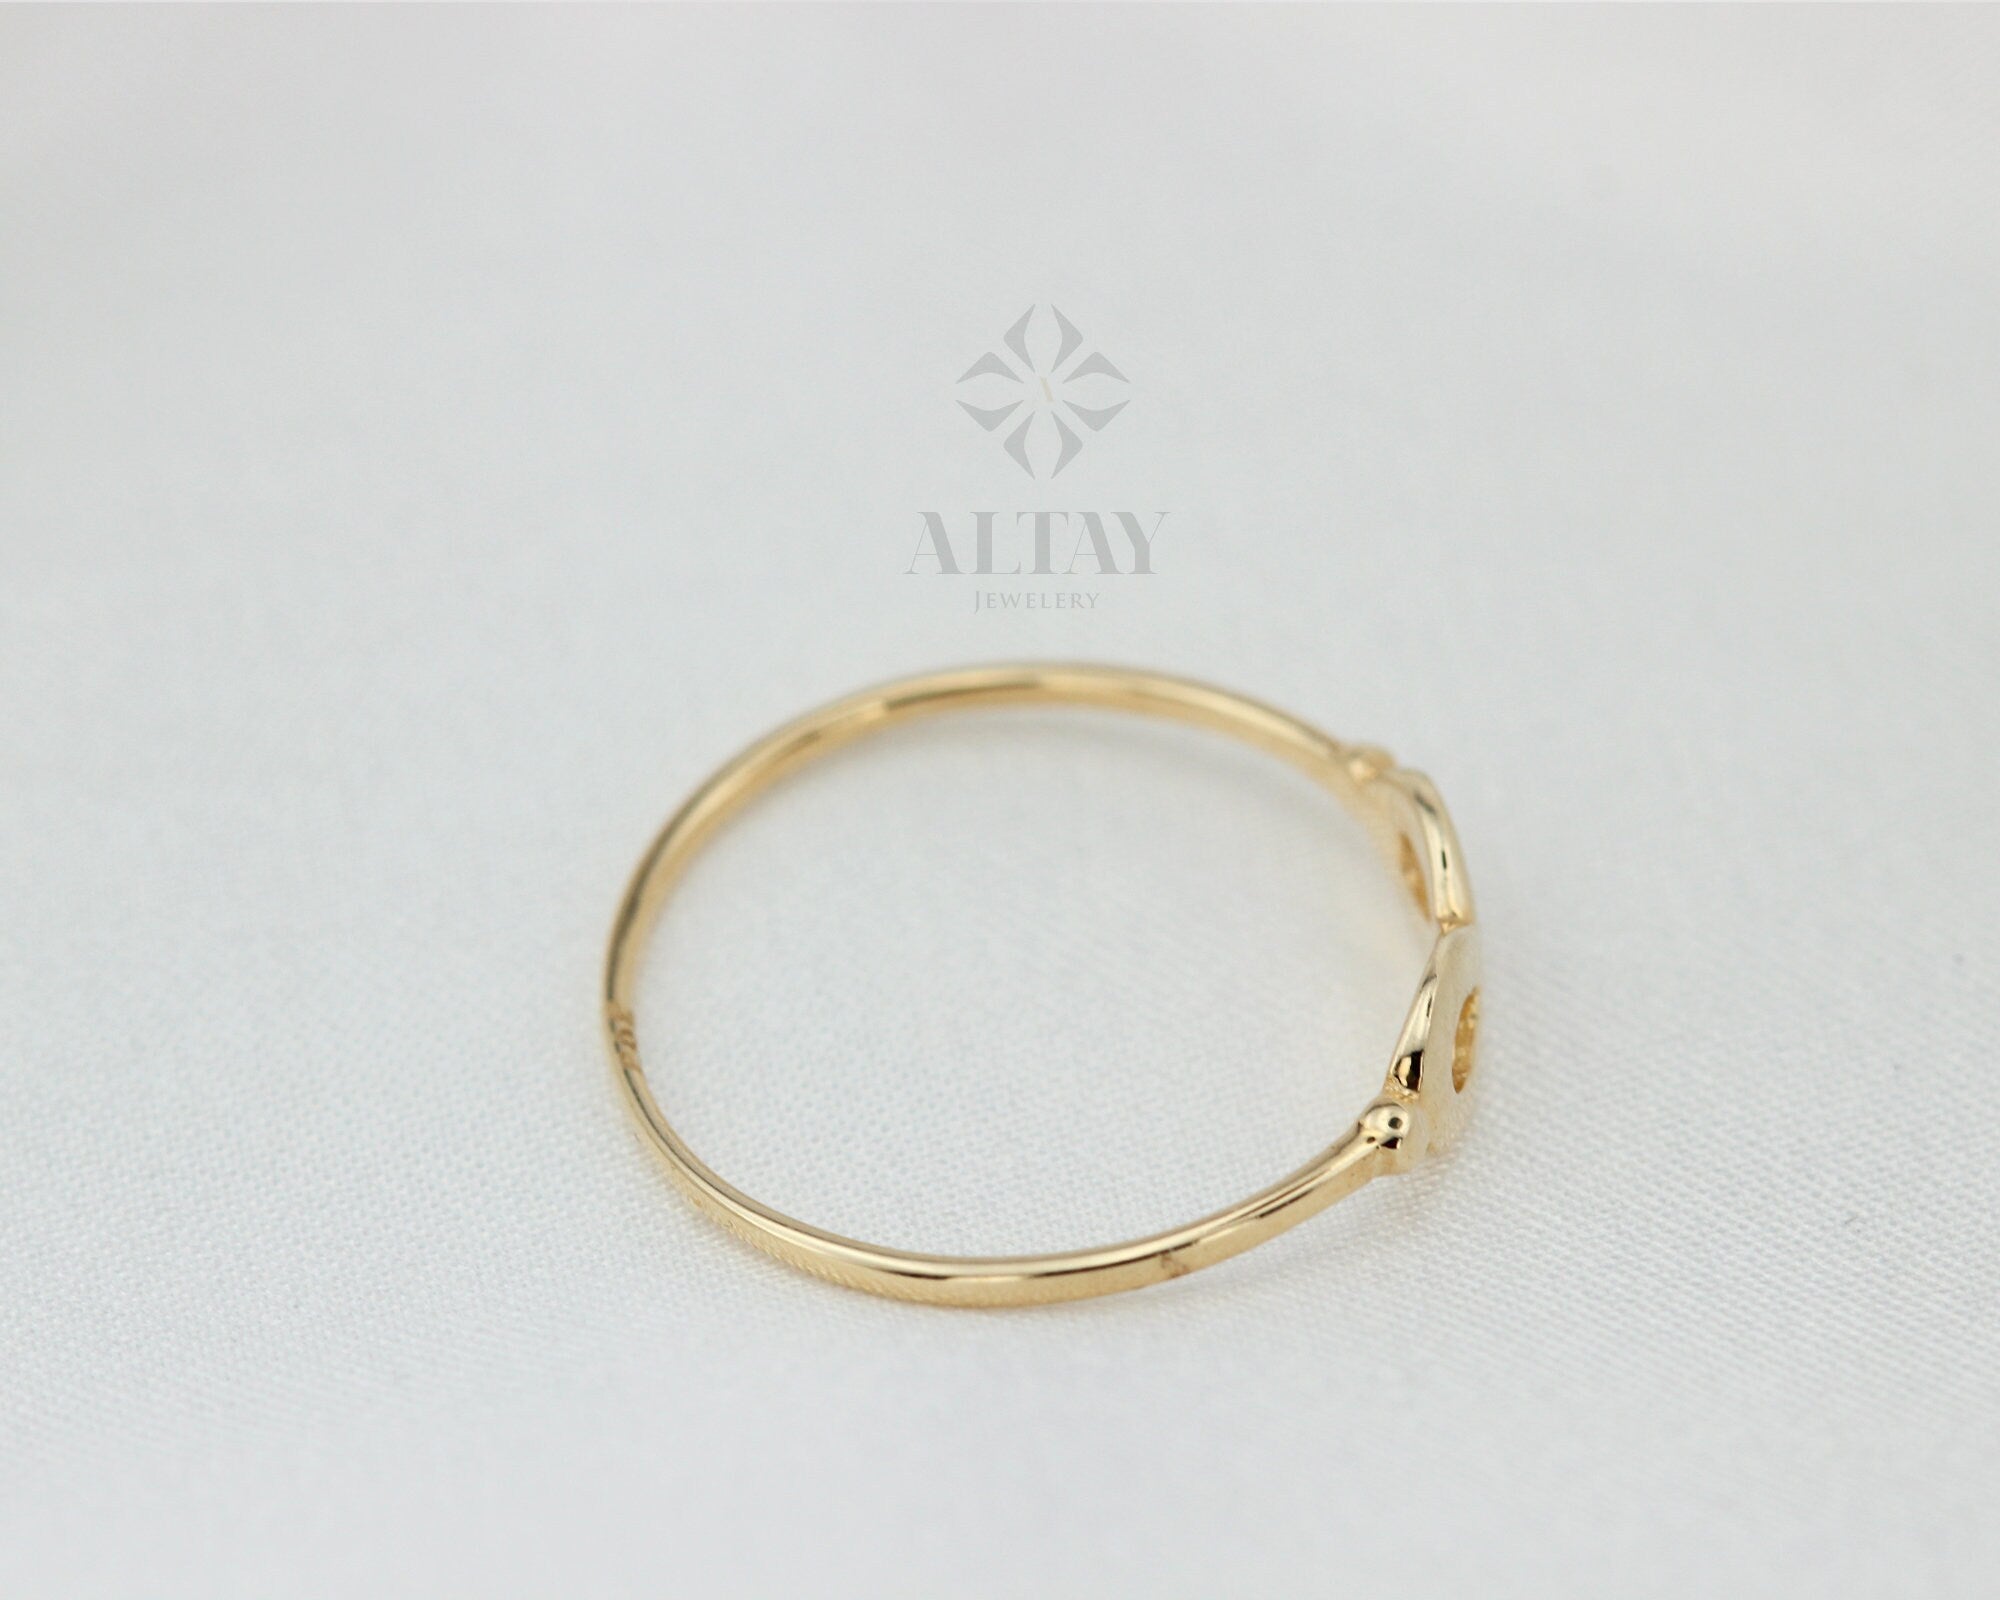 14K Gold Infinity Ring, Wedding Band Ring, Forever Ring, Delicate Love Ring, Stackable Eternity Ring, Dainty Gold Ring, Anniversary Gift